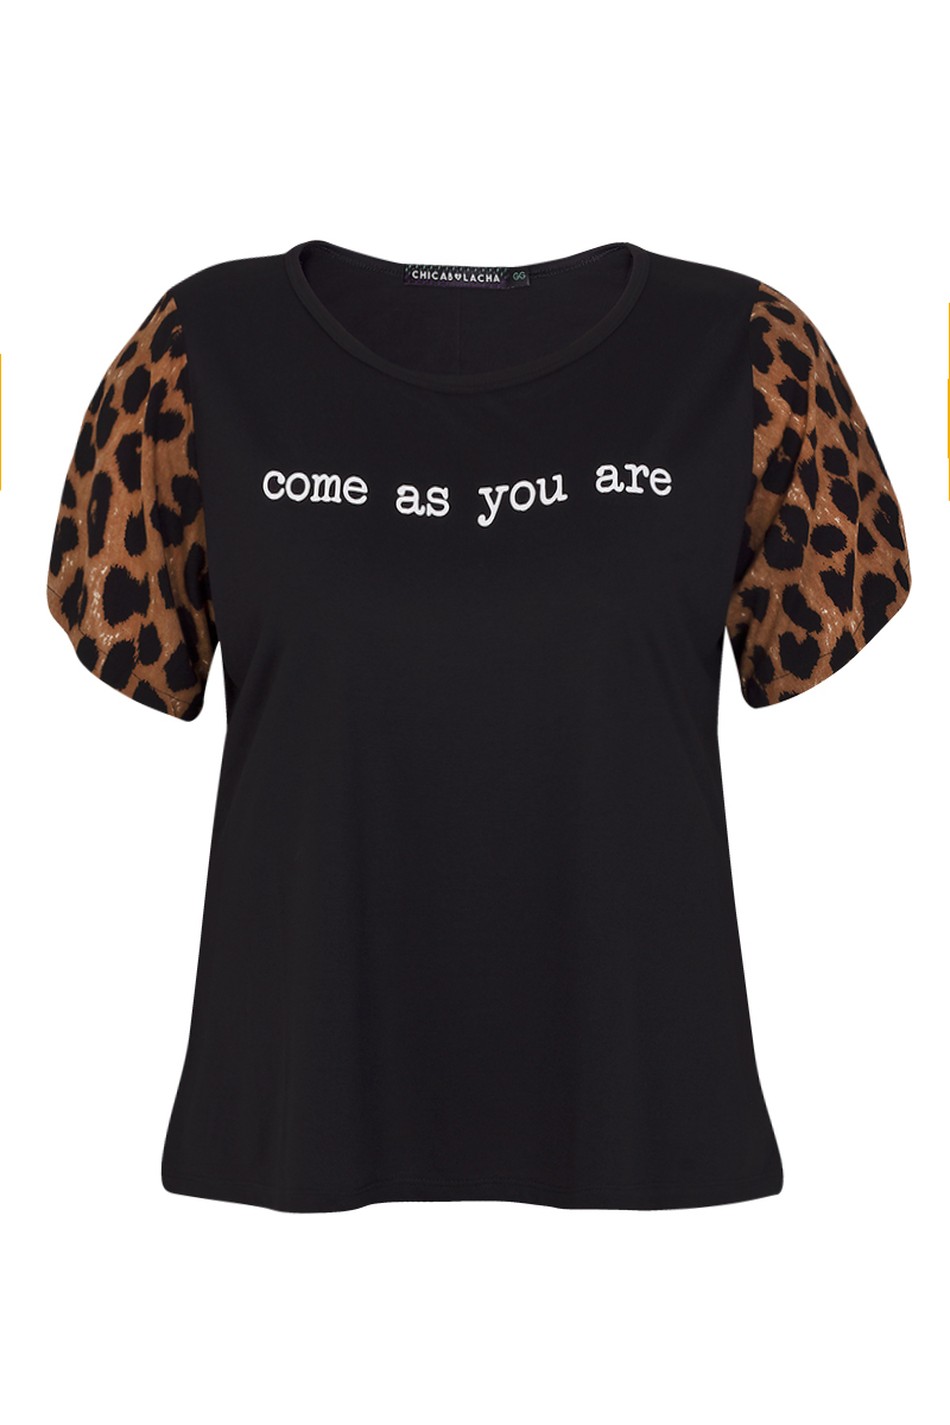 T-SHIRT COME AS YOU ARE